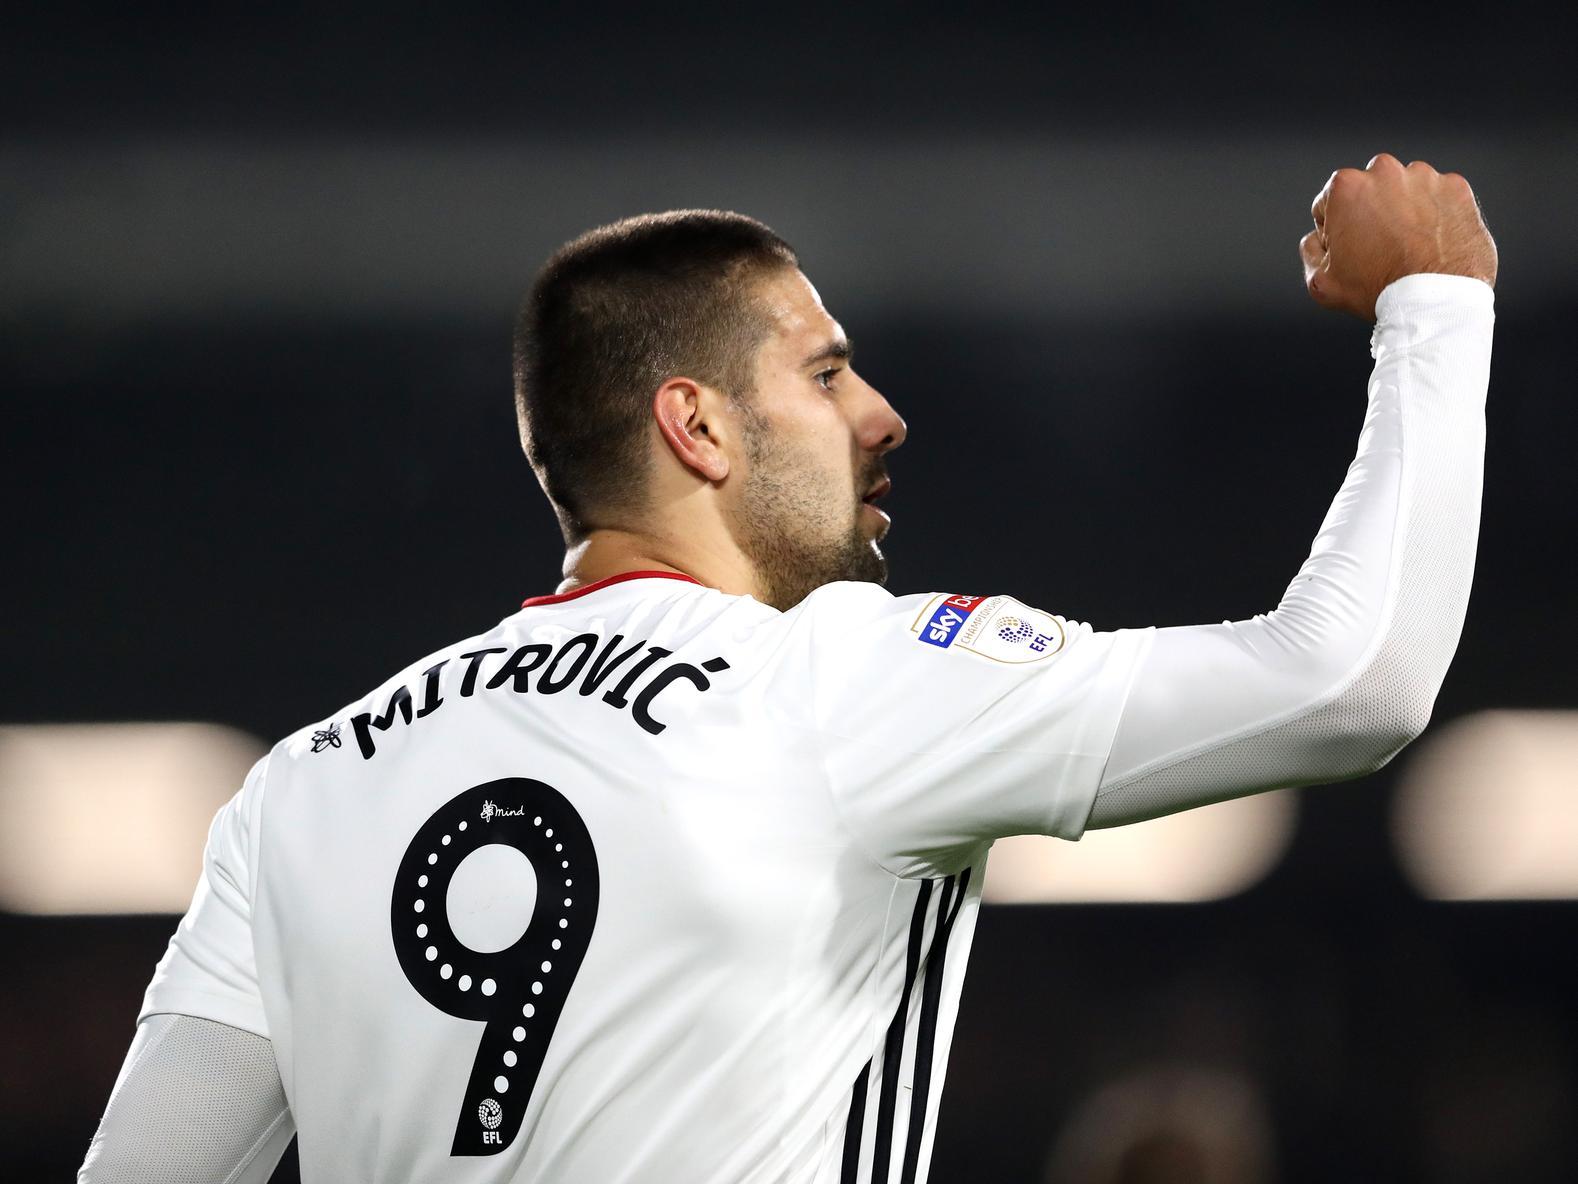 Aston Villa are believed to be the front-runners to sign striker Aleksandar Mitrovic from Fulham in January. He's netted 15 goals in 18 Championship outings so far this season. (Birmingham Mail)